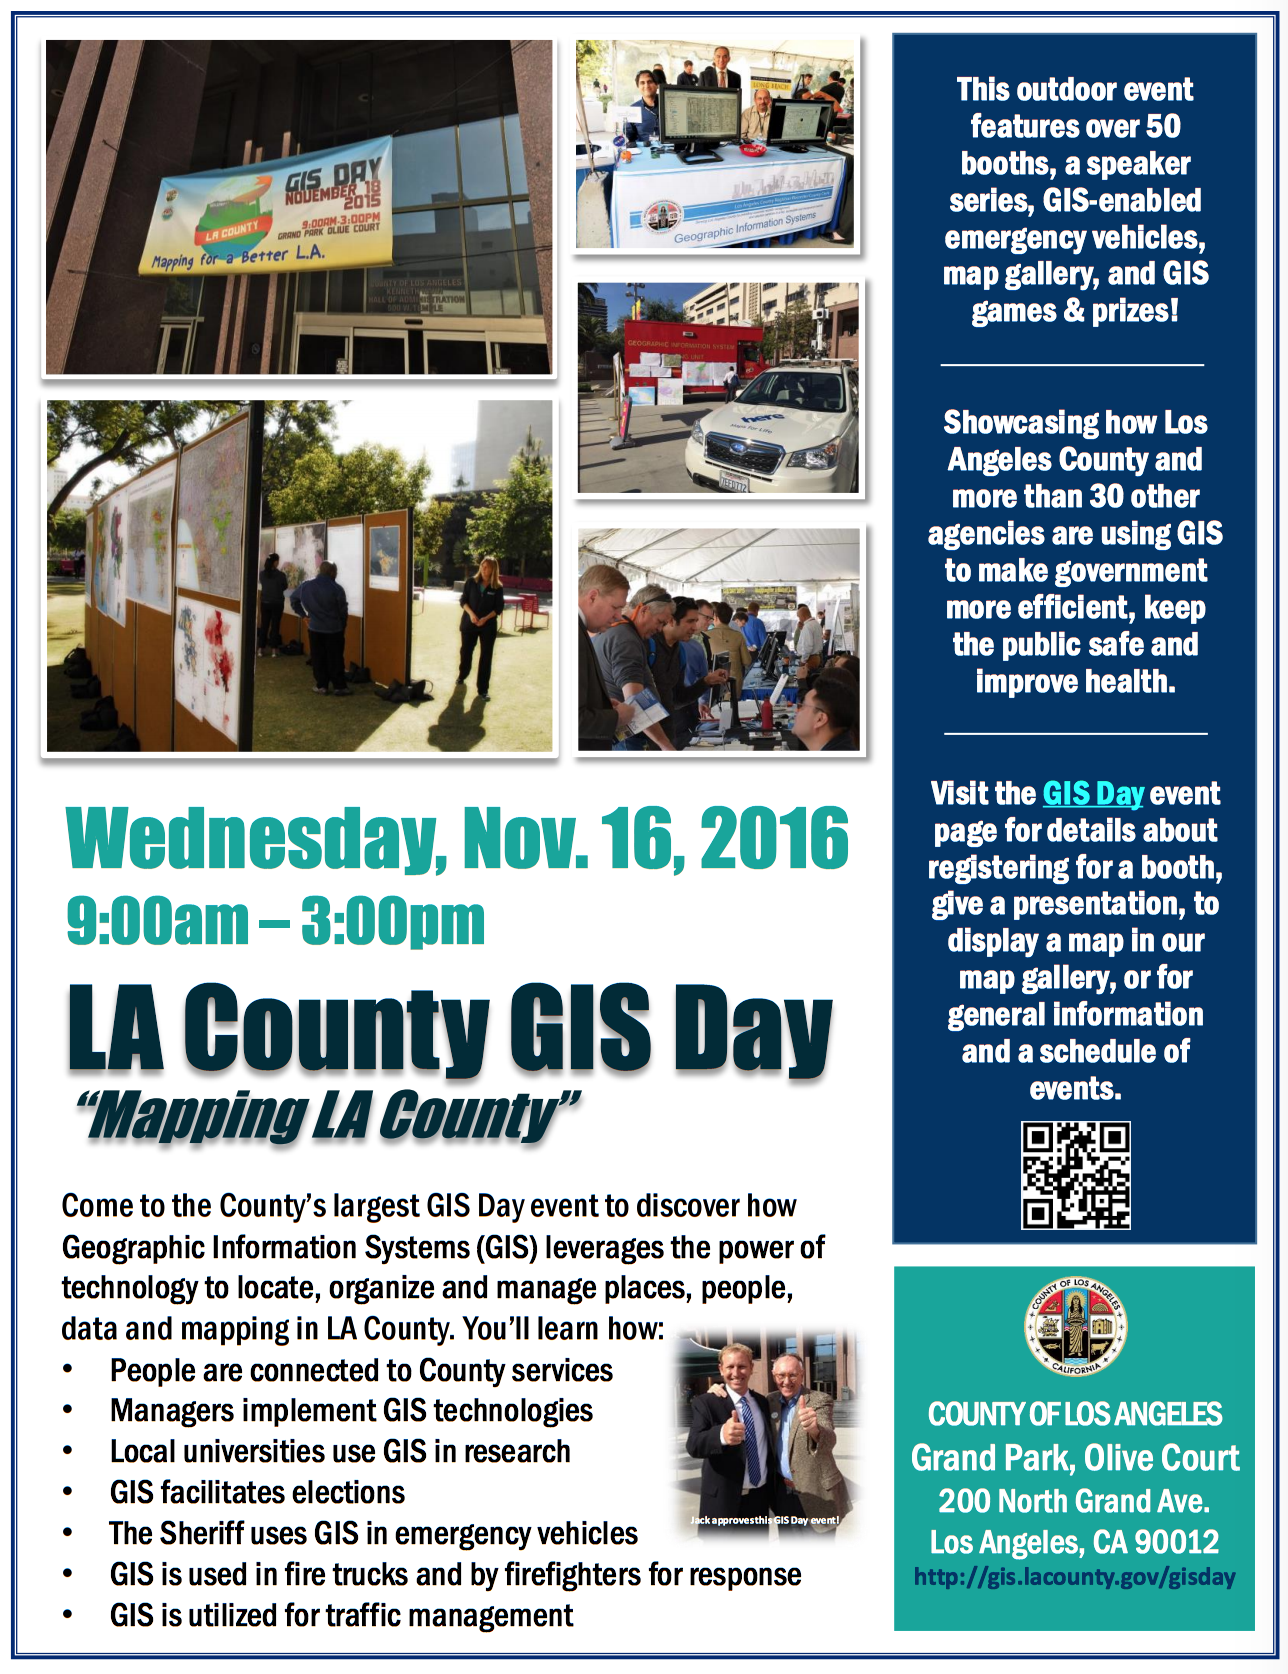 Go Metro to L.A. County GIS Day at Grand Park Van Nuys Neighborhood